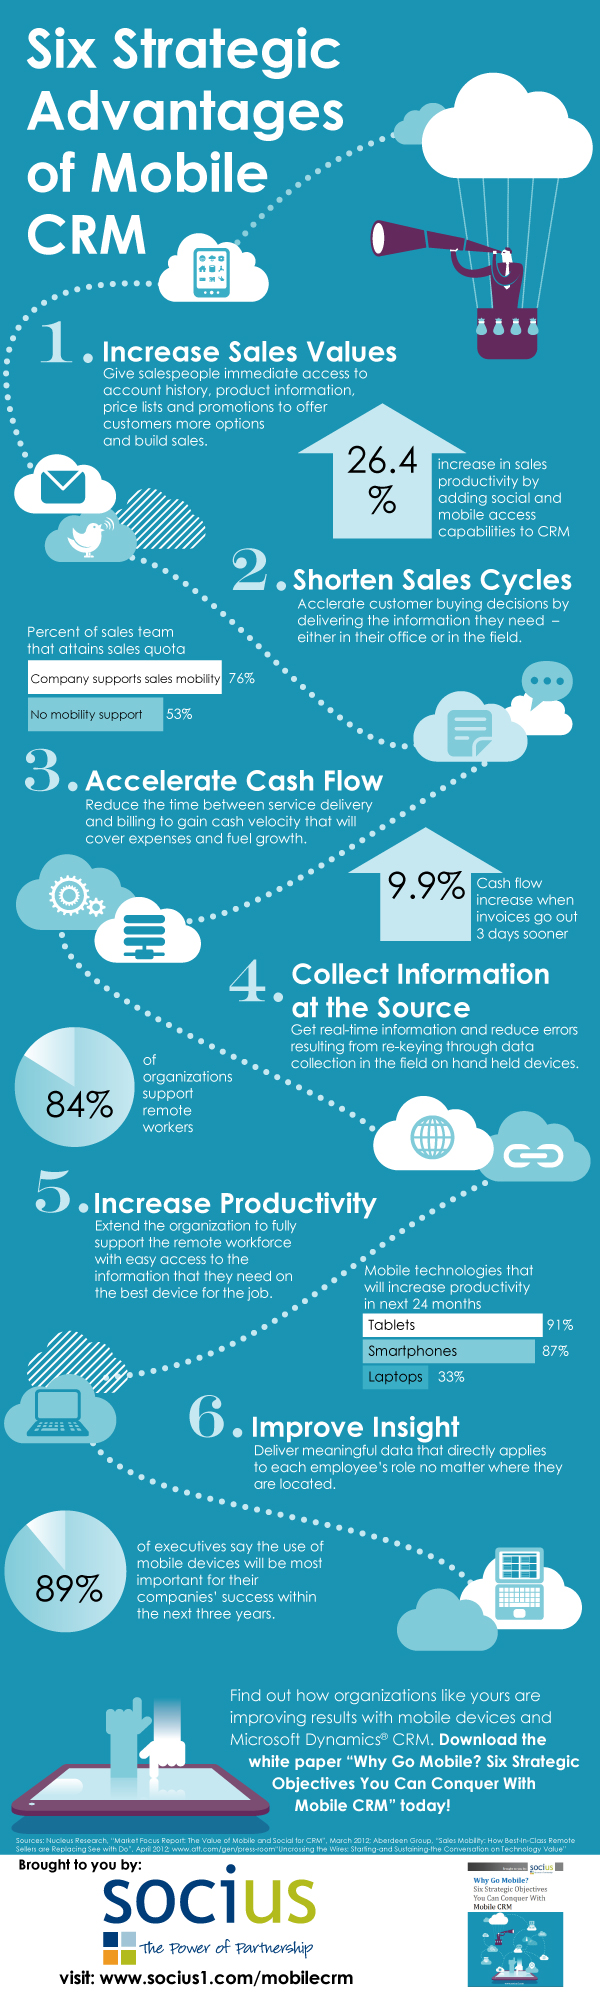 CRM-Mobile-Infographic